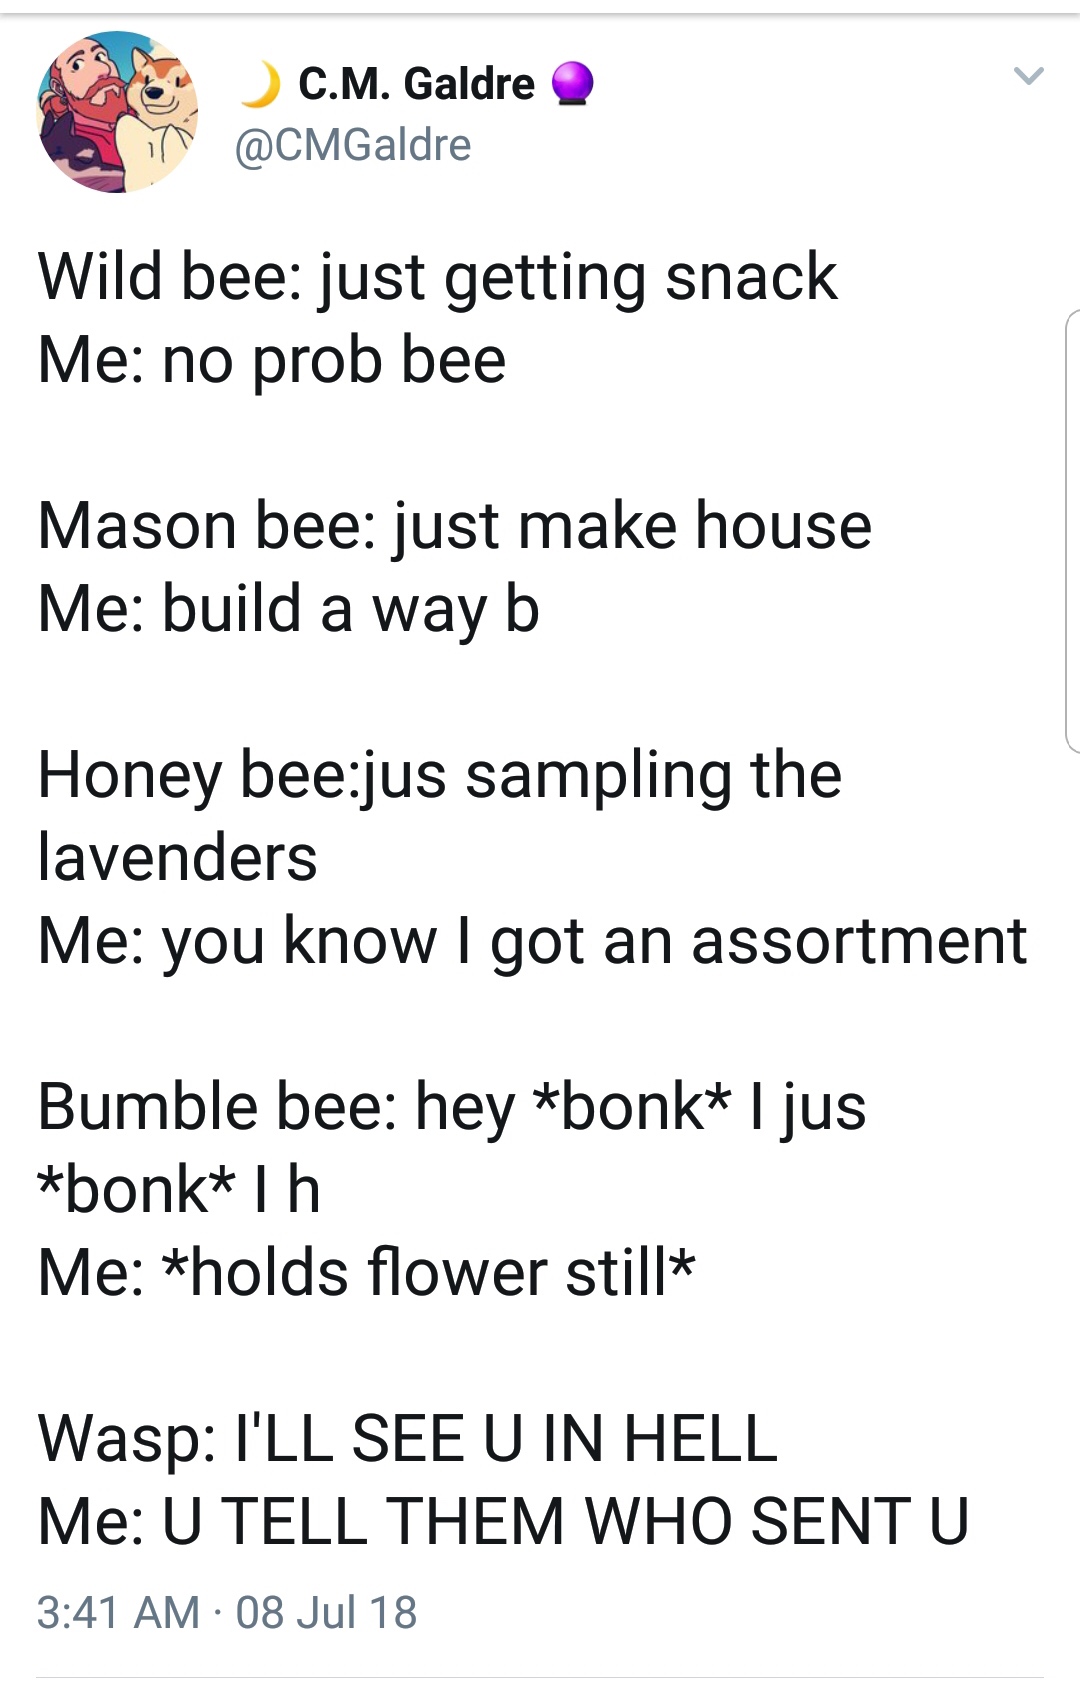 bee meme wasp - C.M. Galdre Wild bee just getting snack Me no prob bee Mason bee just make house Me build a way b Honey beejus sampling the lavenders Me you know I got an assortment Bumble bee hey bonk I jus bonk 1 h Me holds flower still Wasp I'Ll See U 